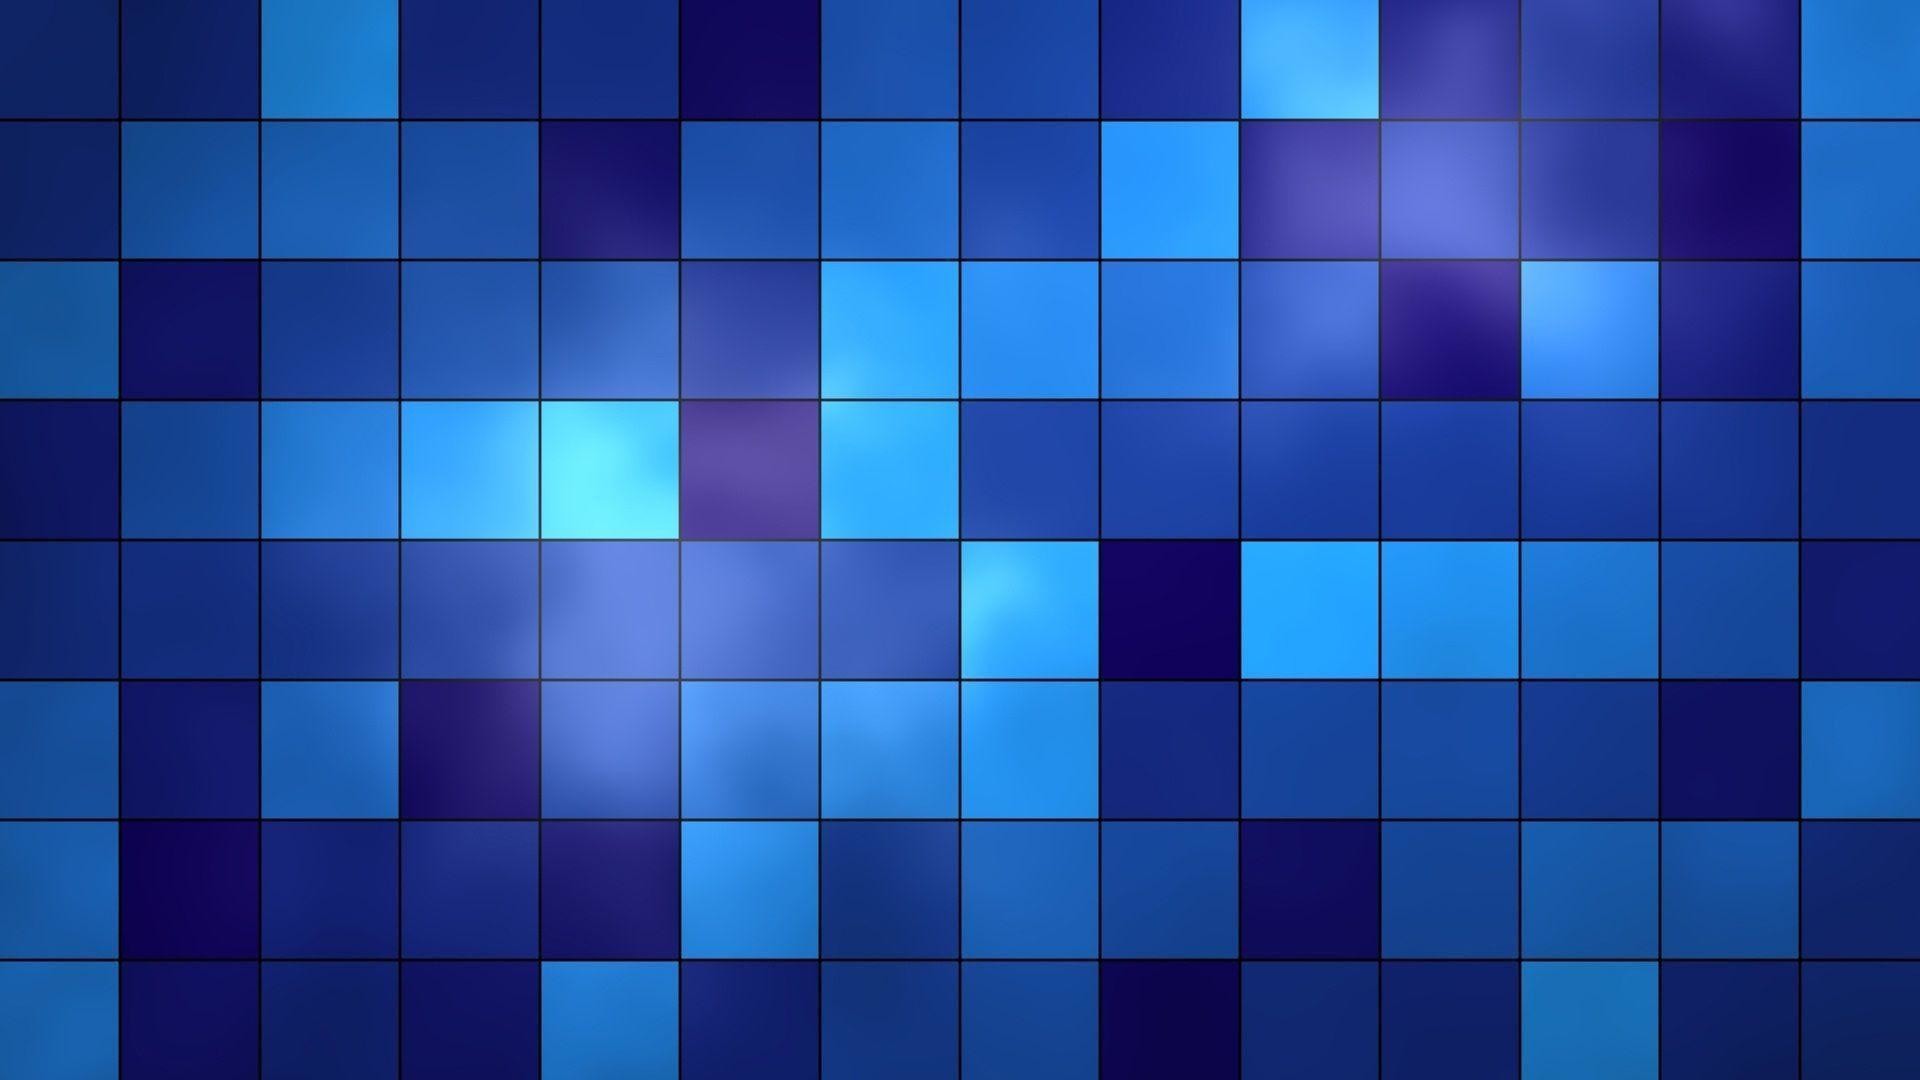 1920x1080 Wallpapers For > Awesome Blue Backgrounds Designs